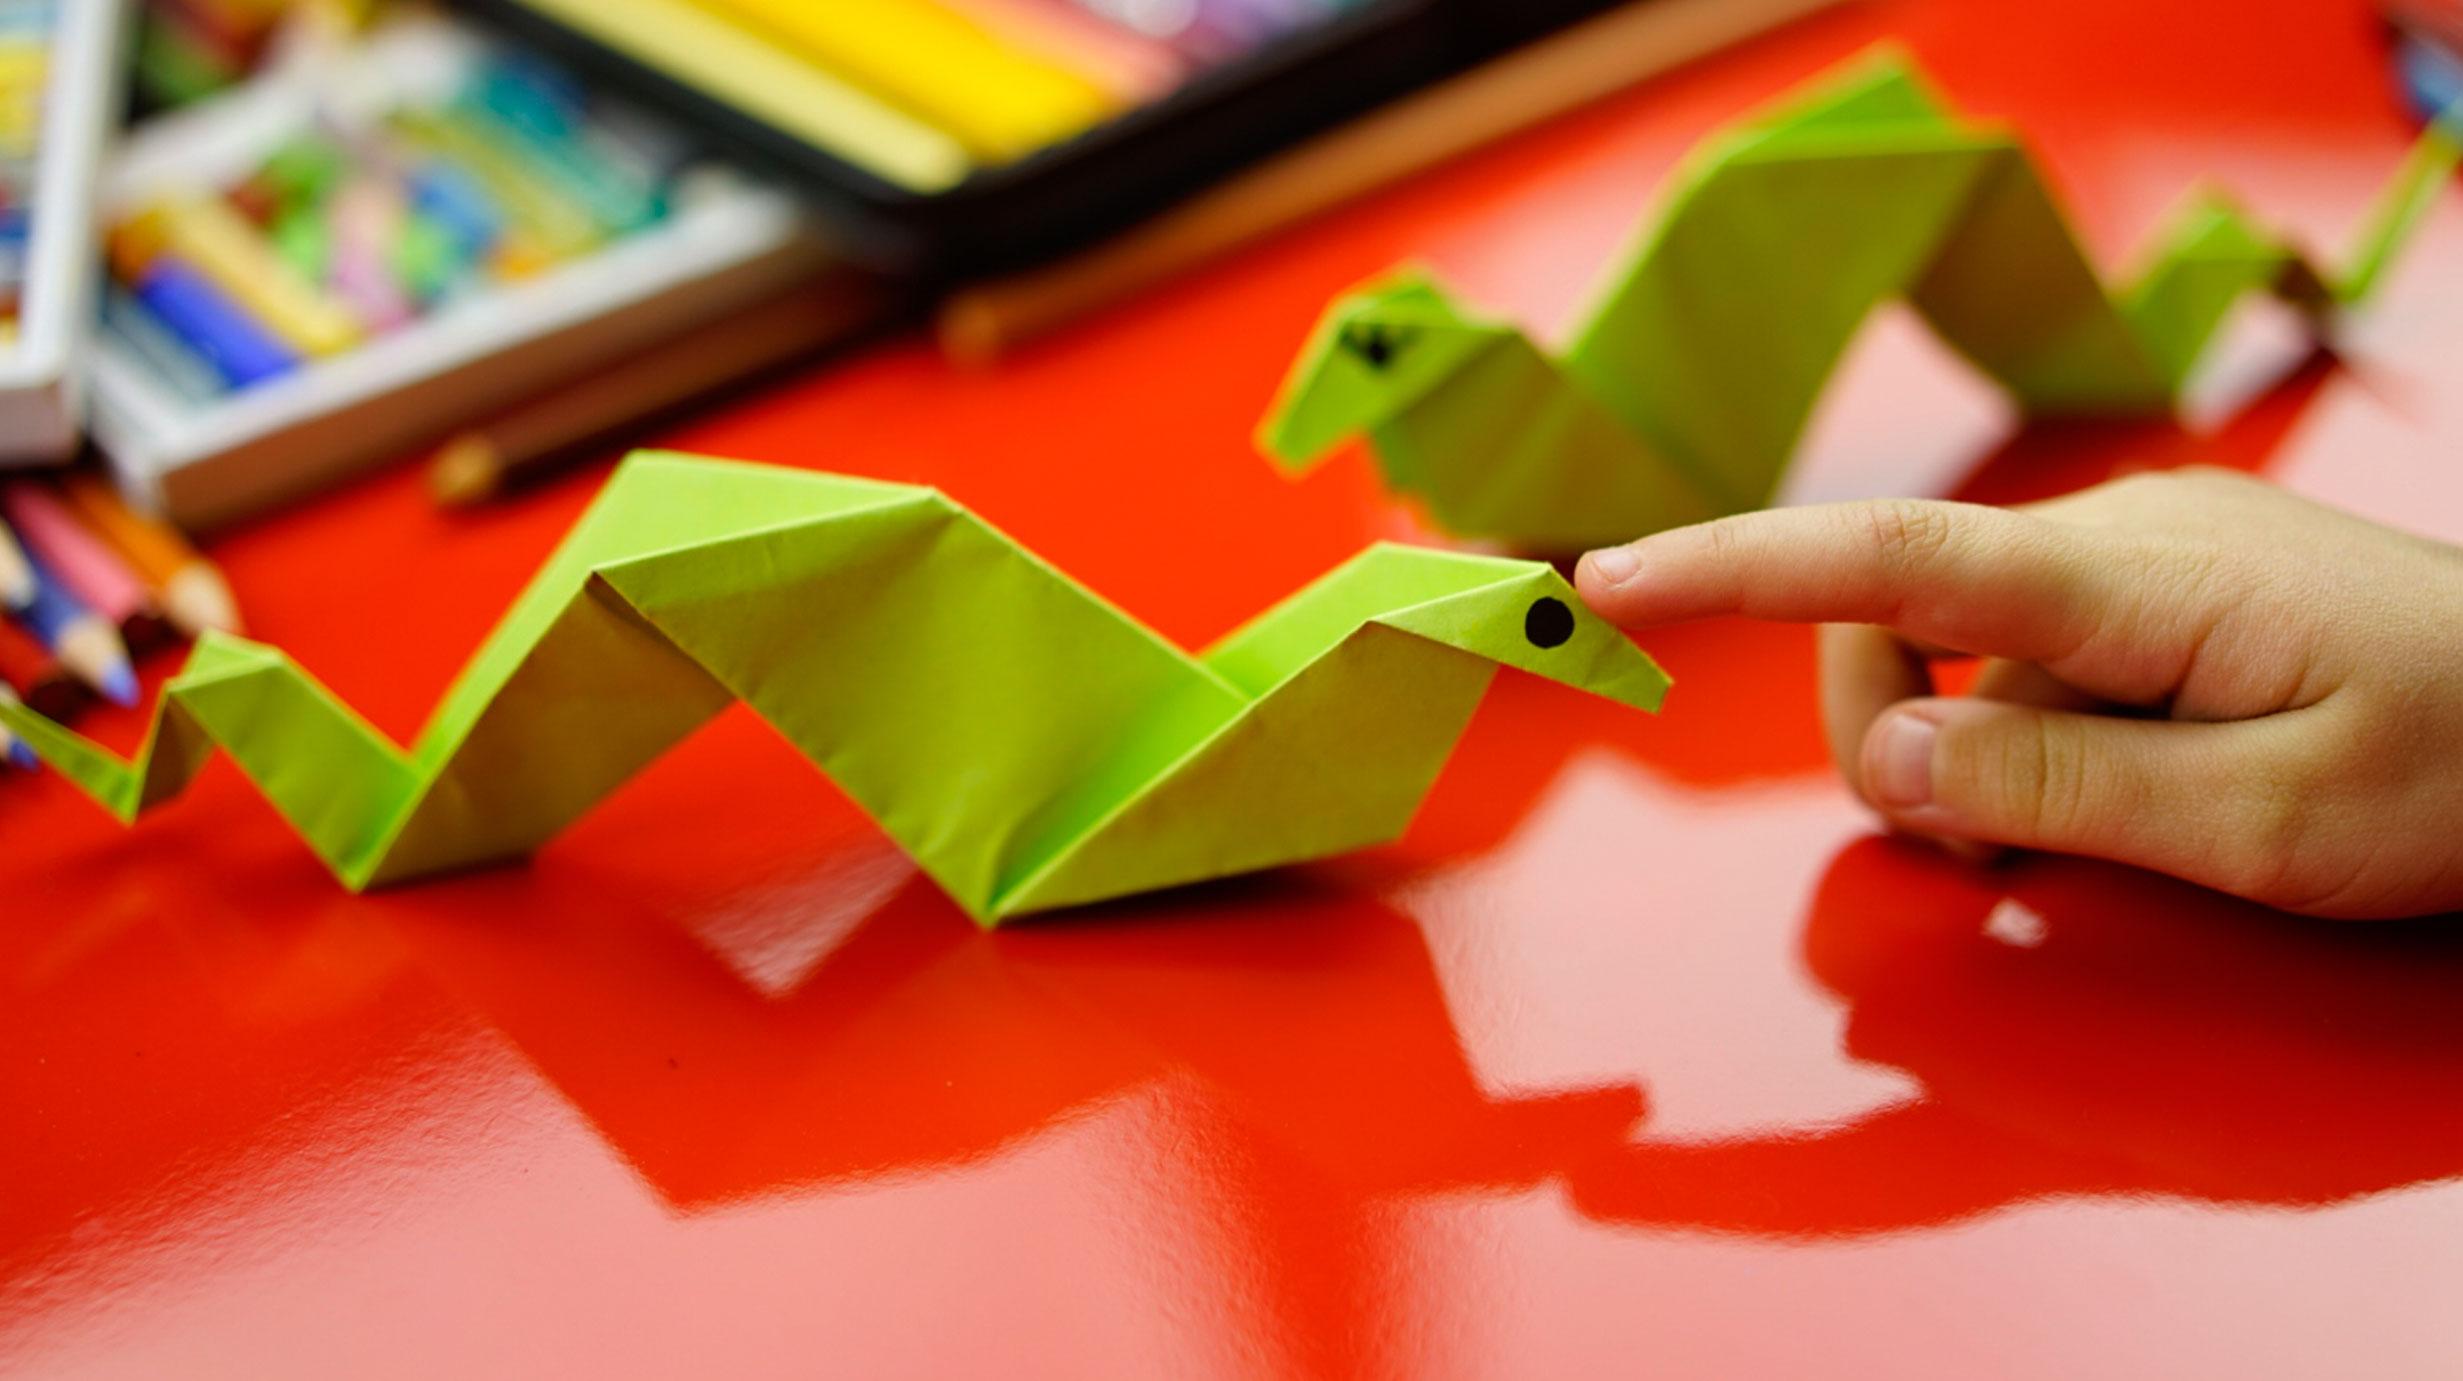 How To Fold An Origami Snake - Art For Kids Hub